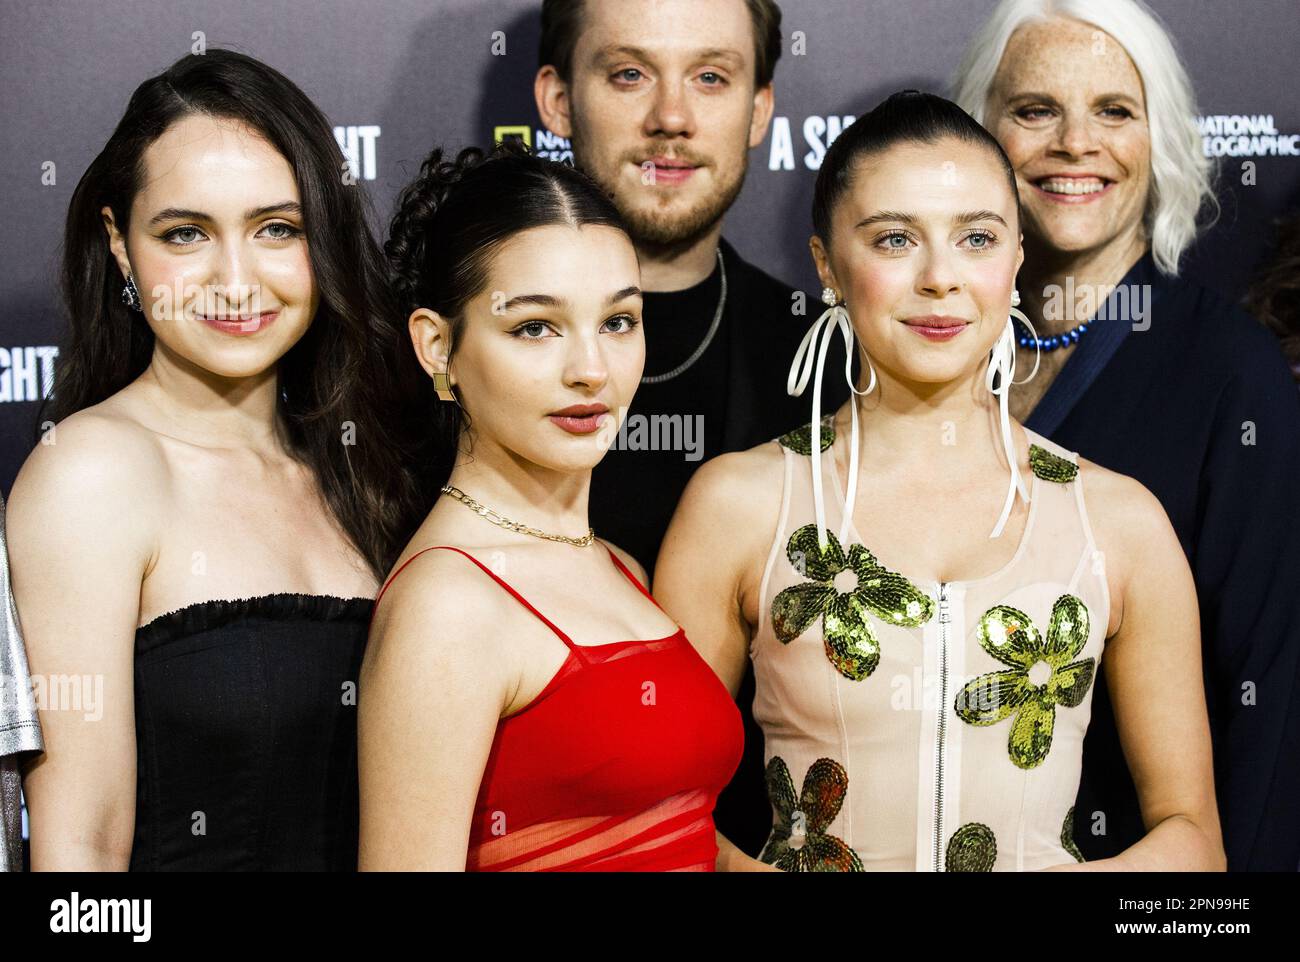 AMSTERDAM - Ashley Brooke, Billie Boullet and Bel Powley on the red carpet  during the European premiere of A Small Light, a new Disney+ series about  the life of Miep Gies. ANP